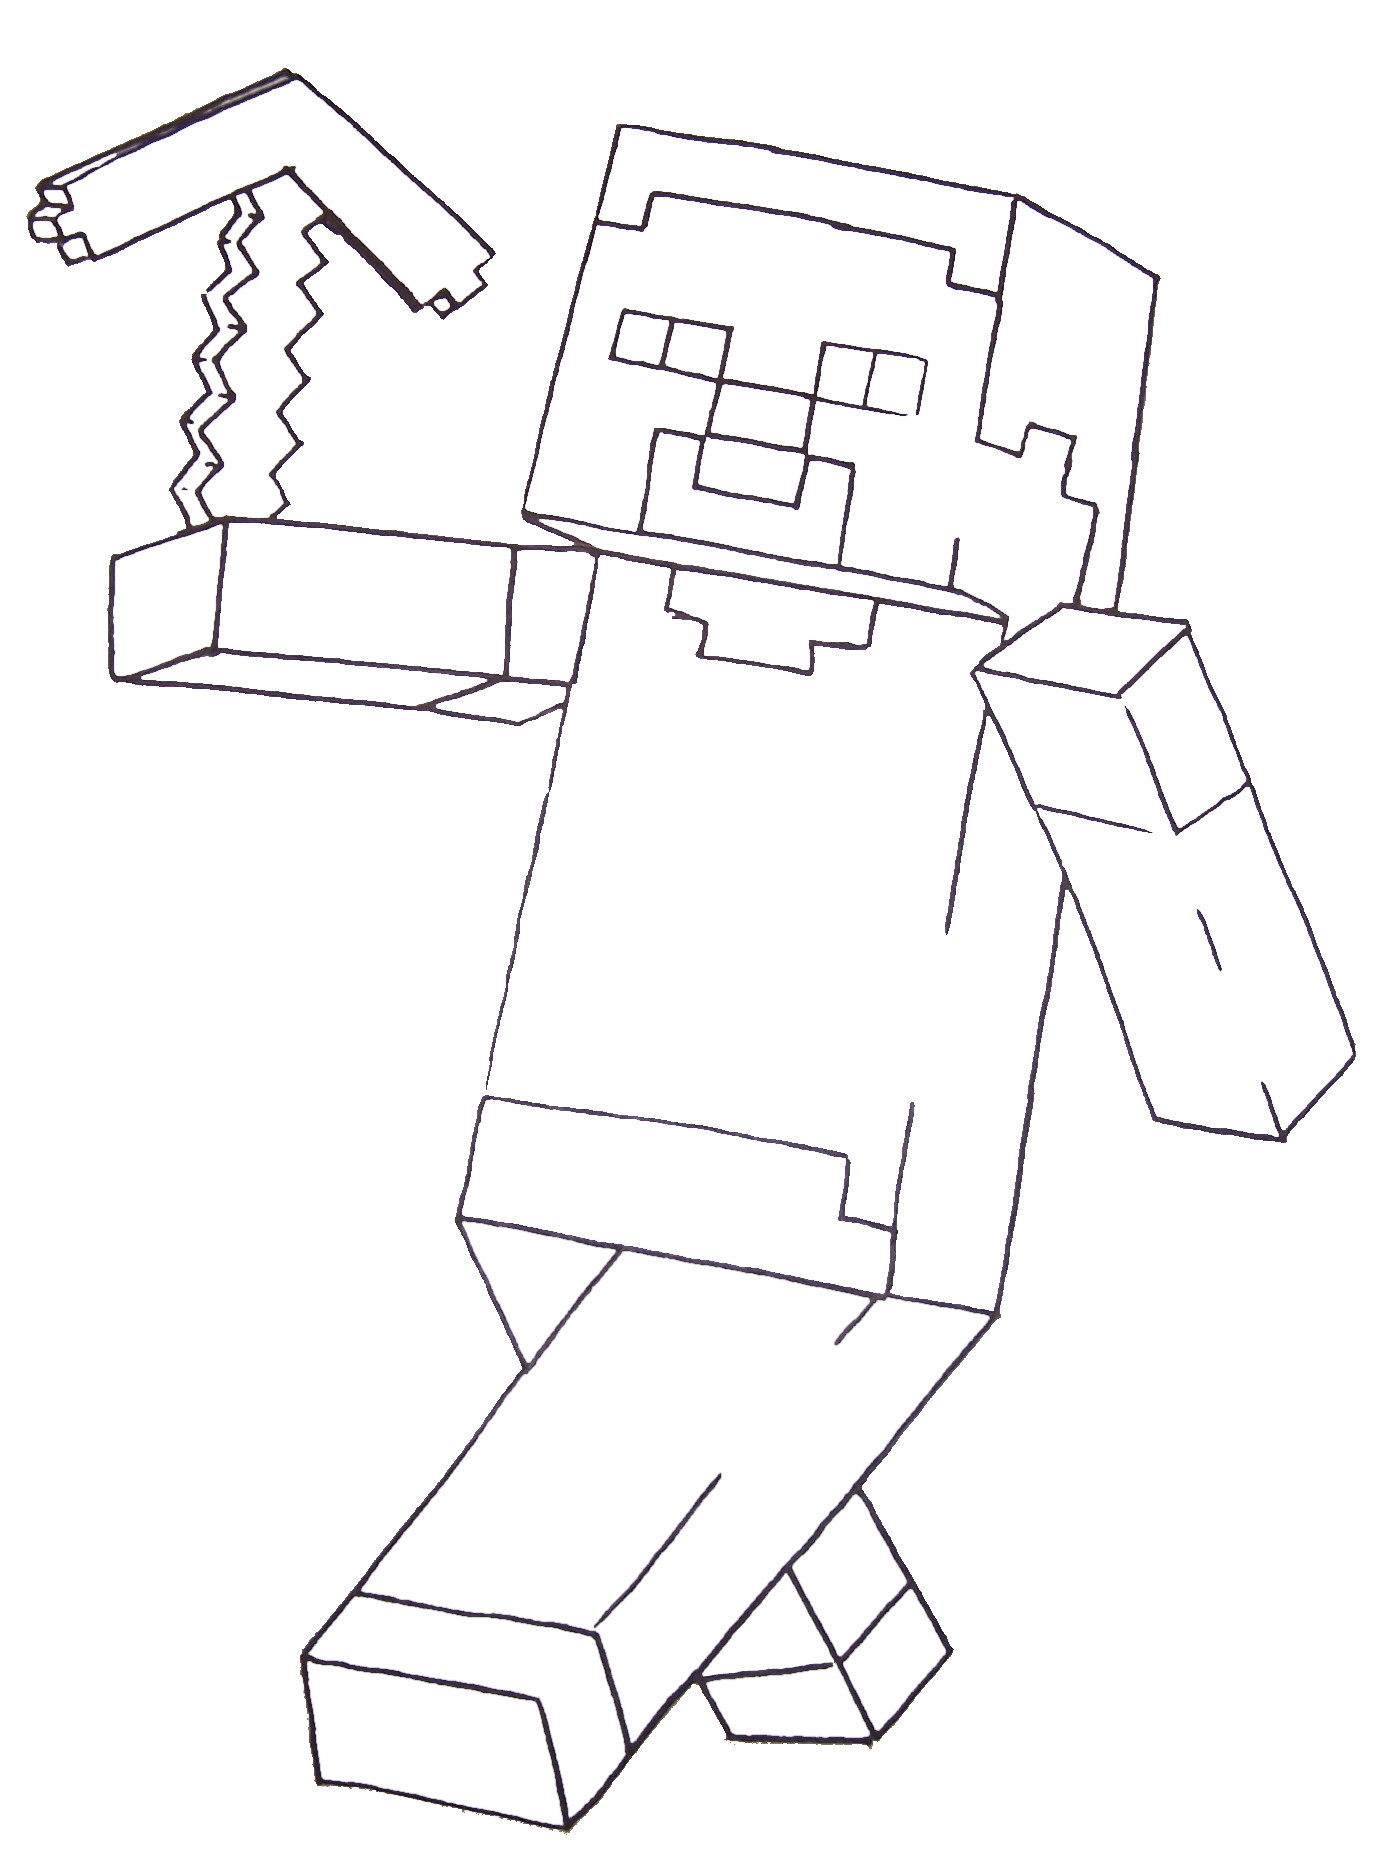 Coloring Sheets For Boys Minecrfat
 Minecraft Coloring Pages Bestofcoloring